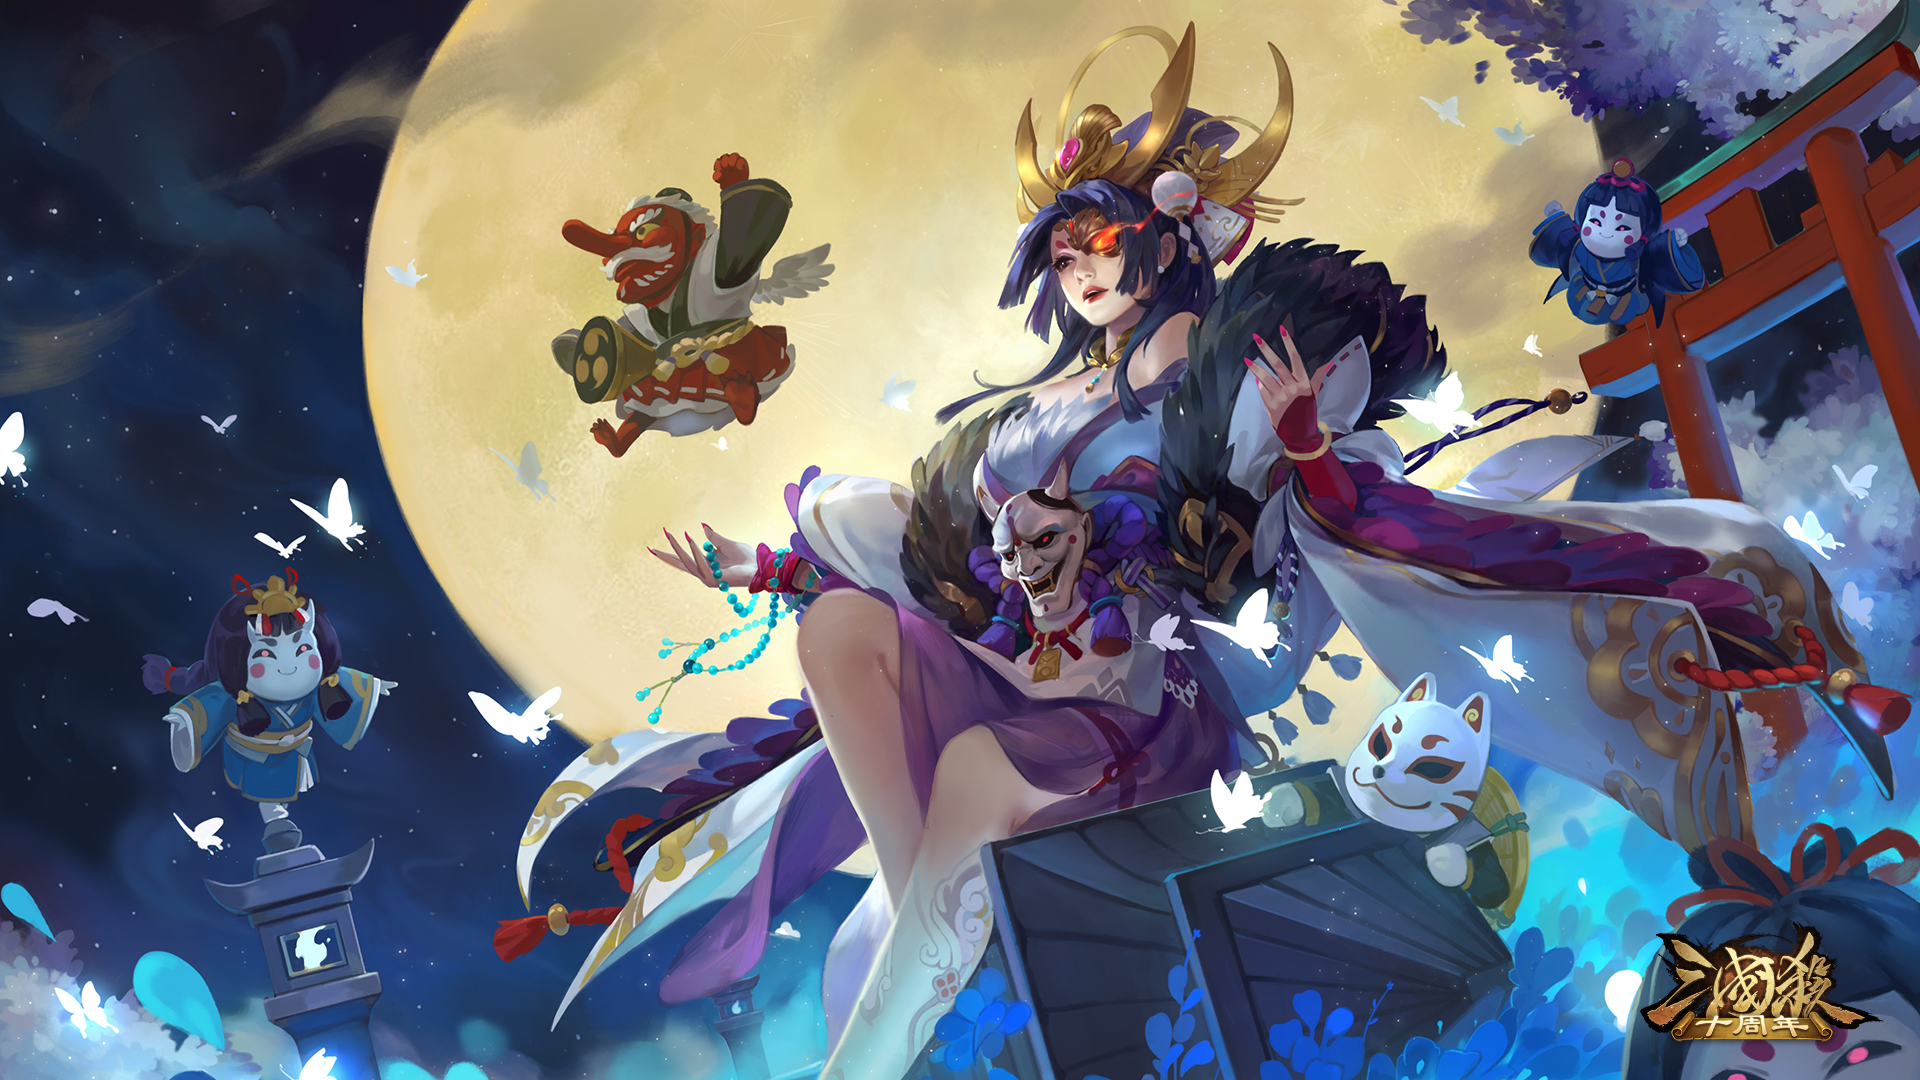 General 1920x1080 Three Kingdoms sanguosha Asian women video game art video game characters torii video games sitting logo Moon night stars insect butterfly fox mask mask